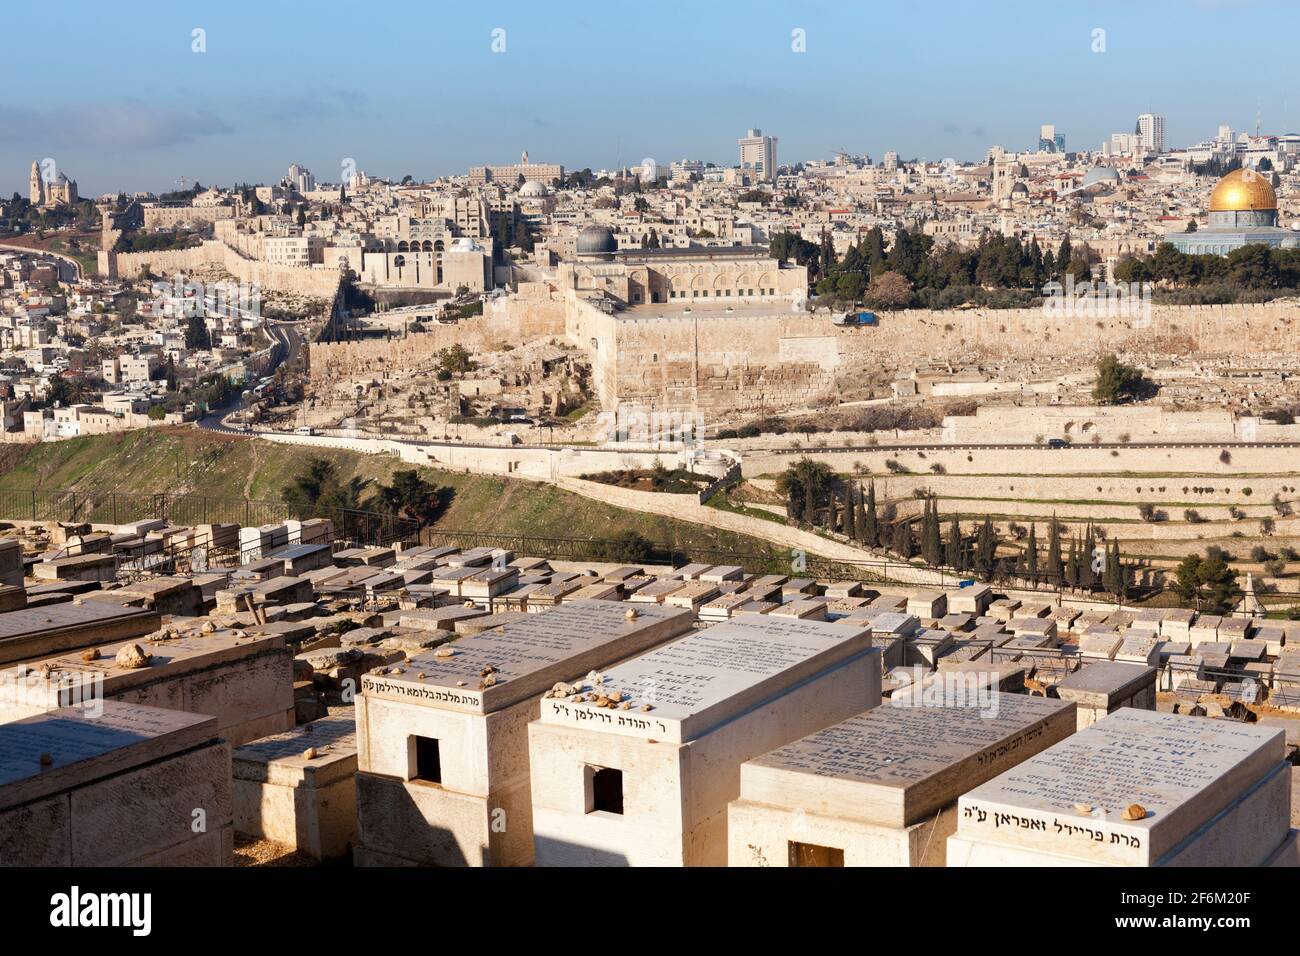 Israel, Jerusalem, view of the Old City of Jerusalem from Mount of Olives Stock Photo